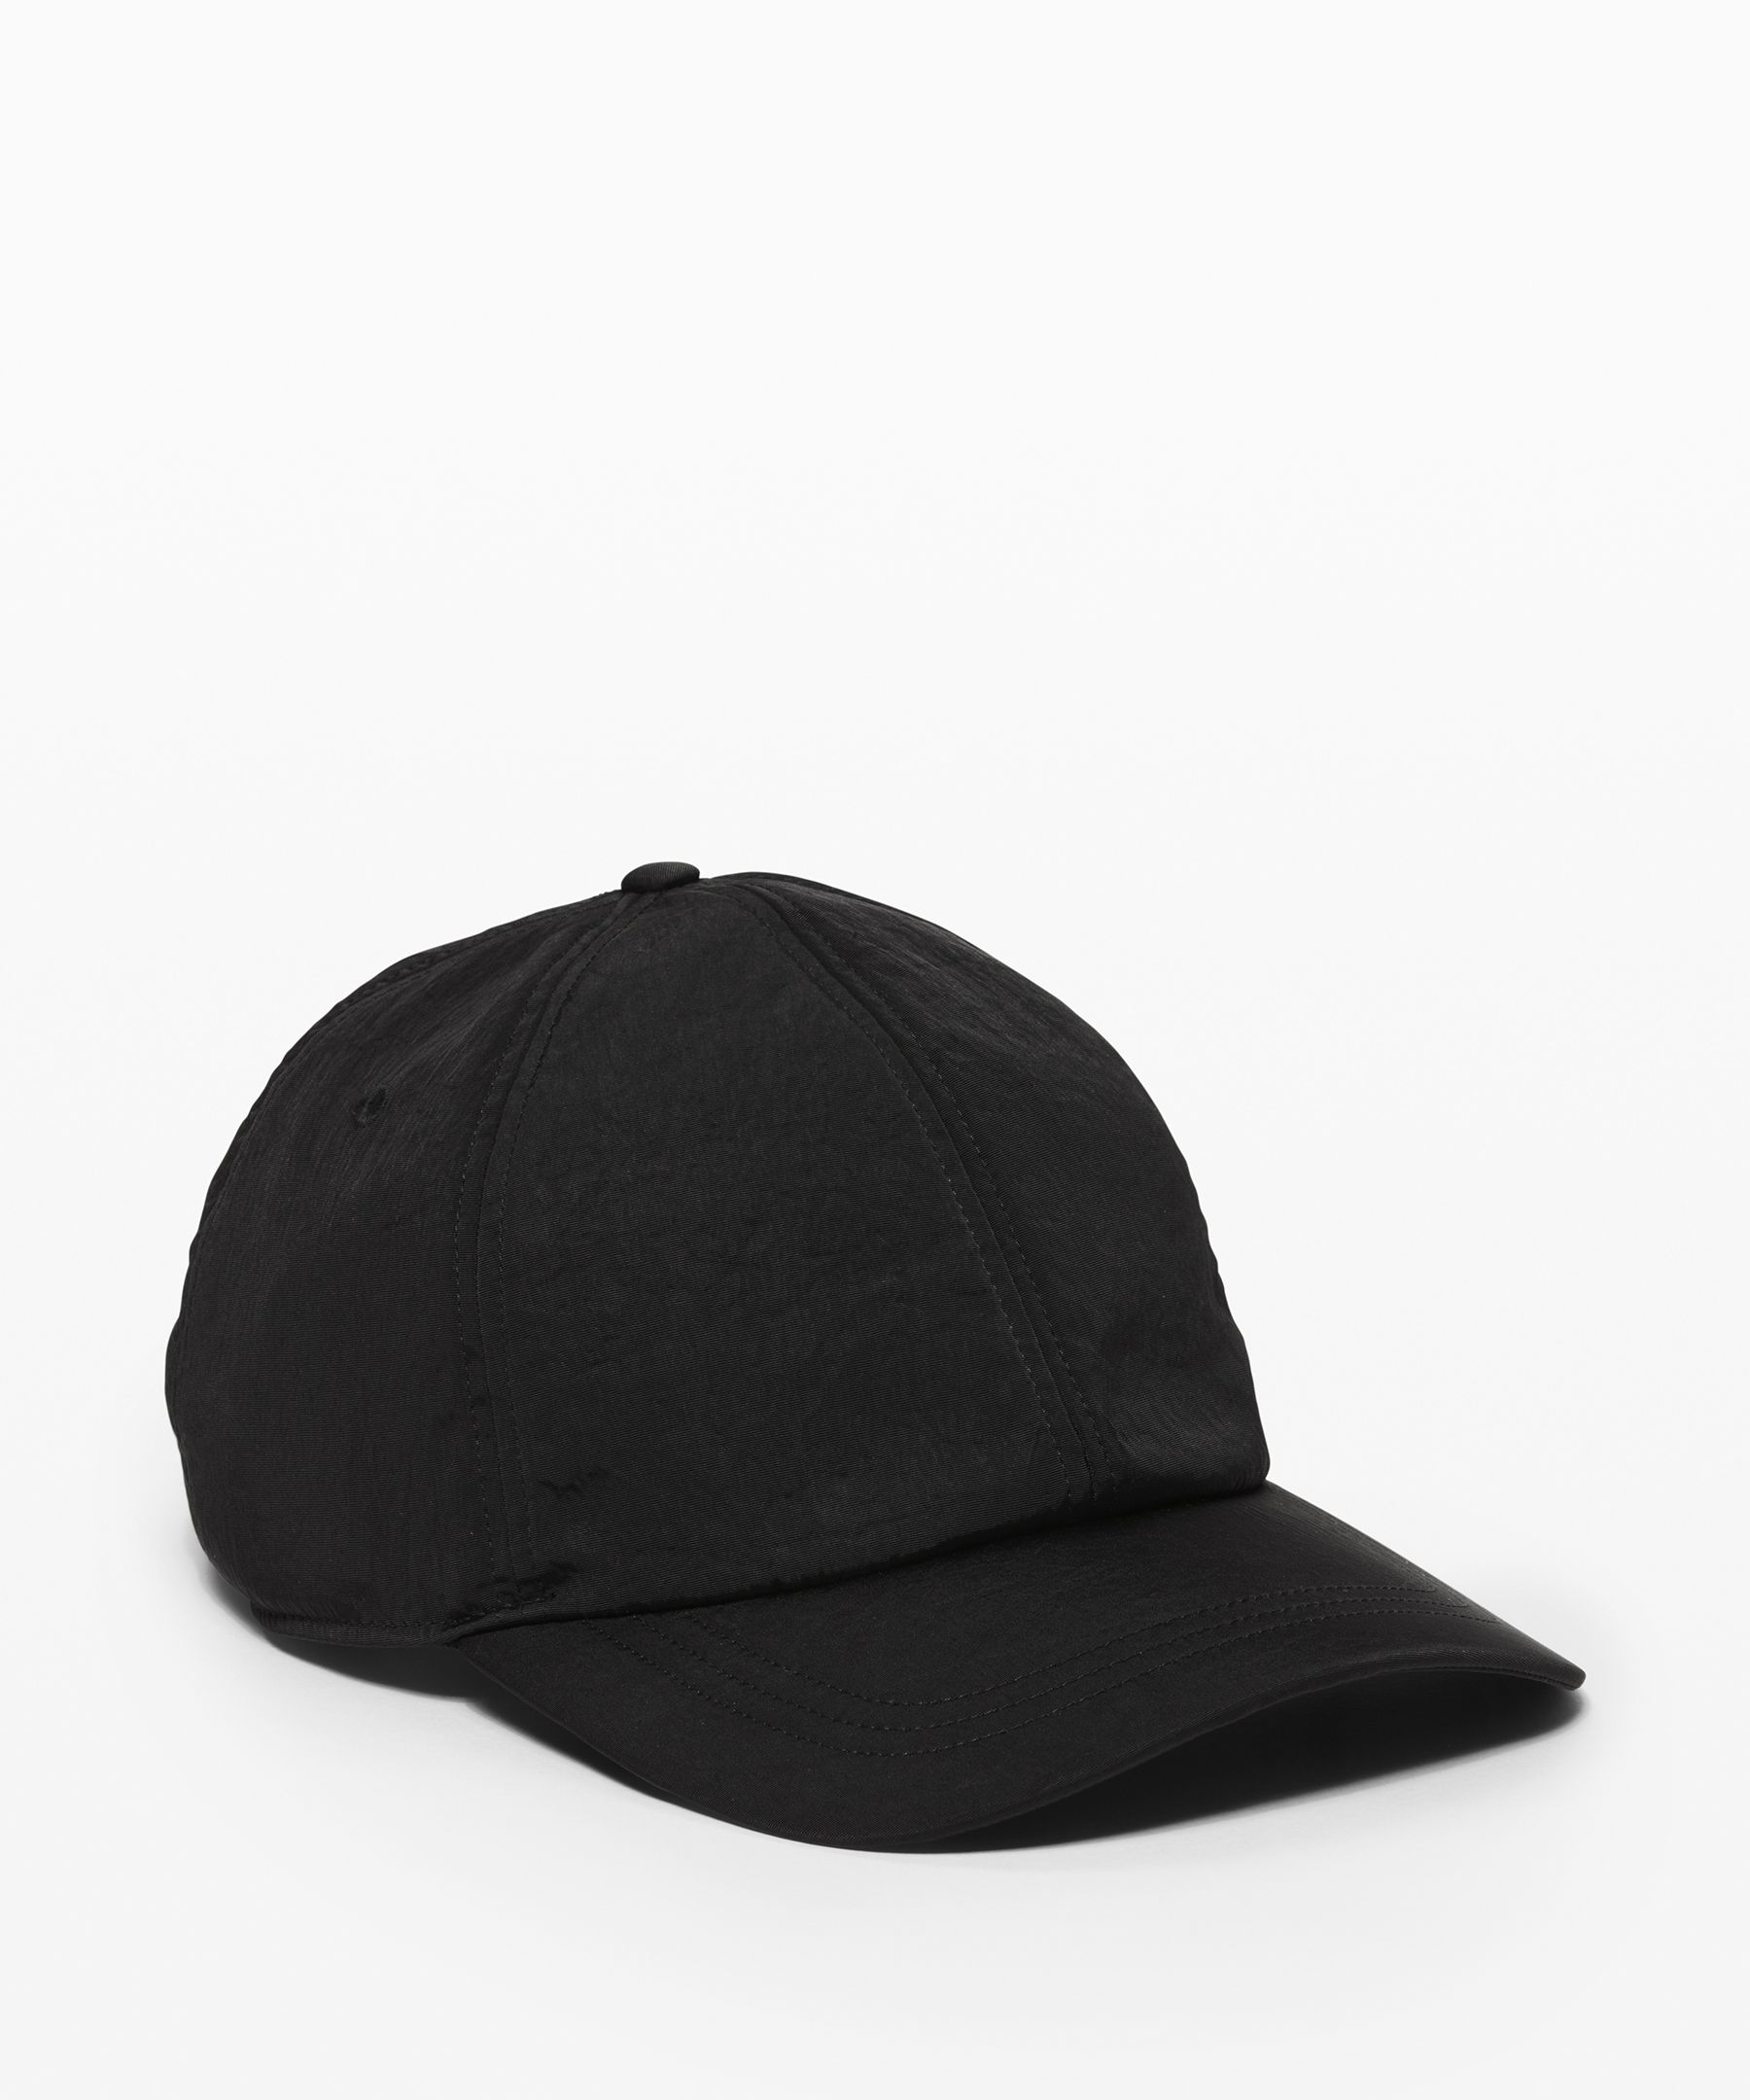 lululemon fast and free hat review